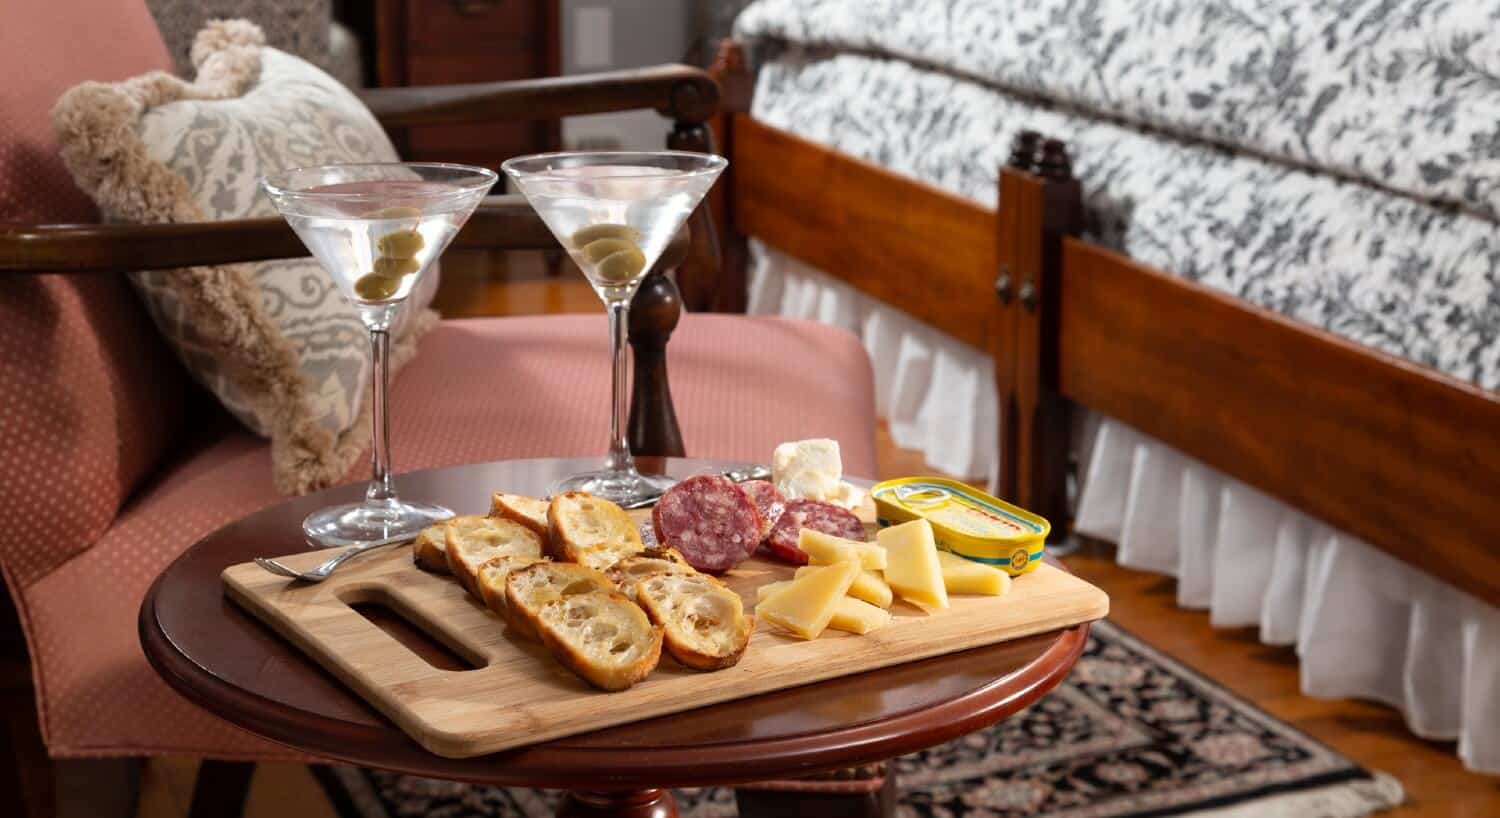 A wooden side table holding platter of cheese, meats and bread with two martinis